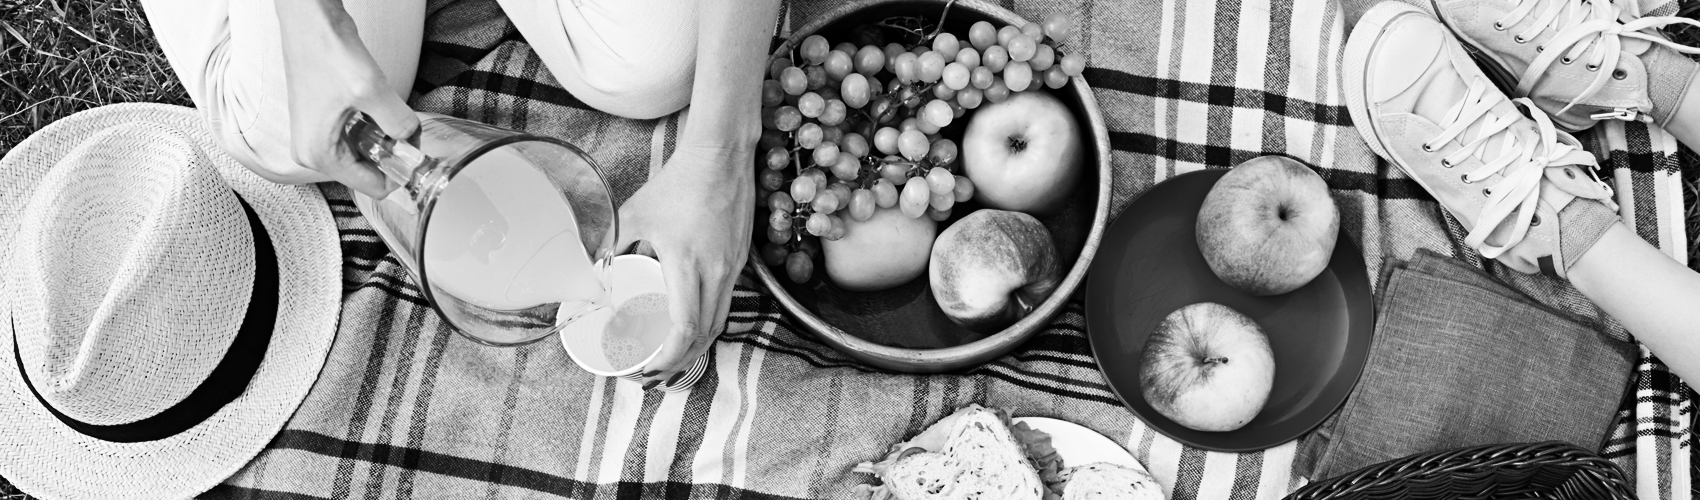 Our Five Favourite Picnic Foods